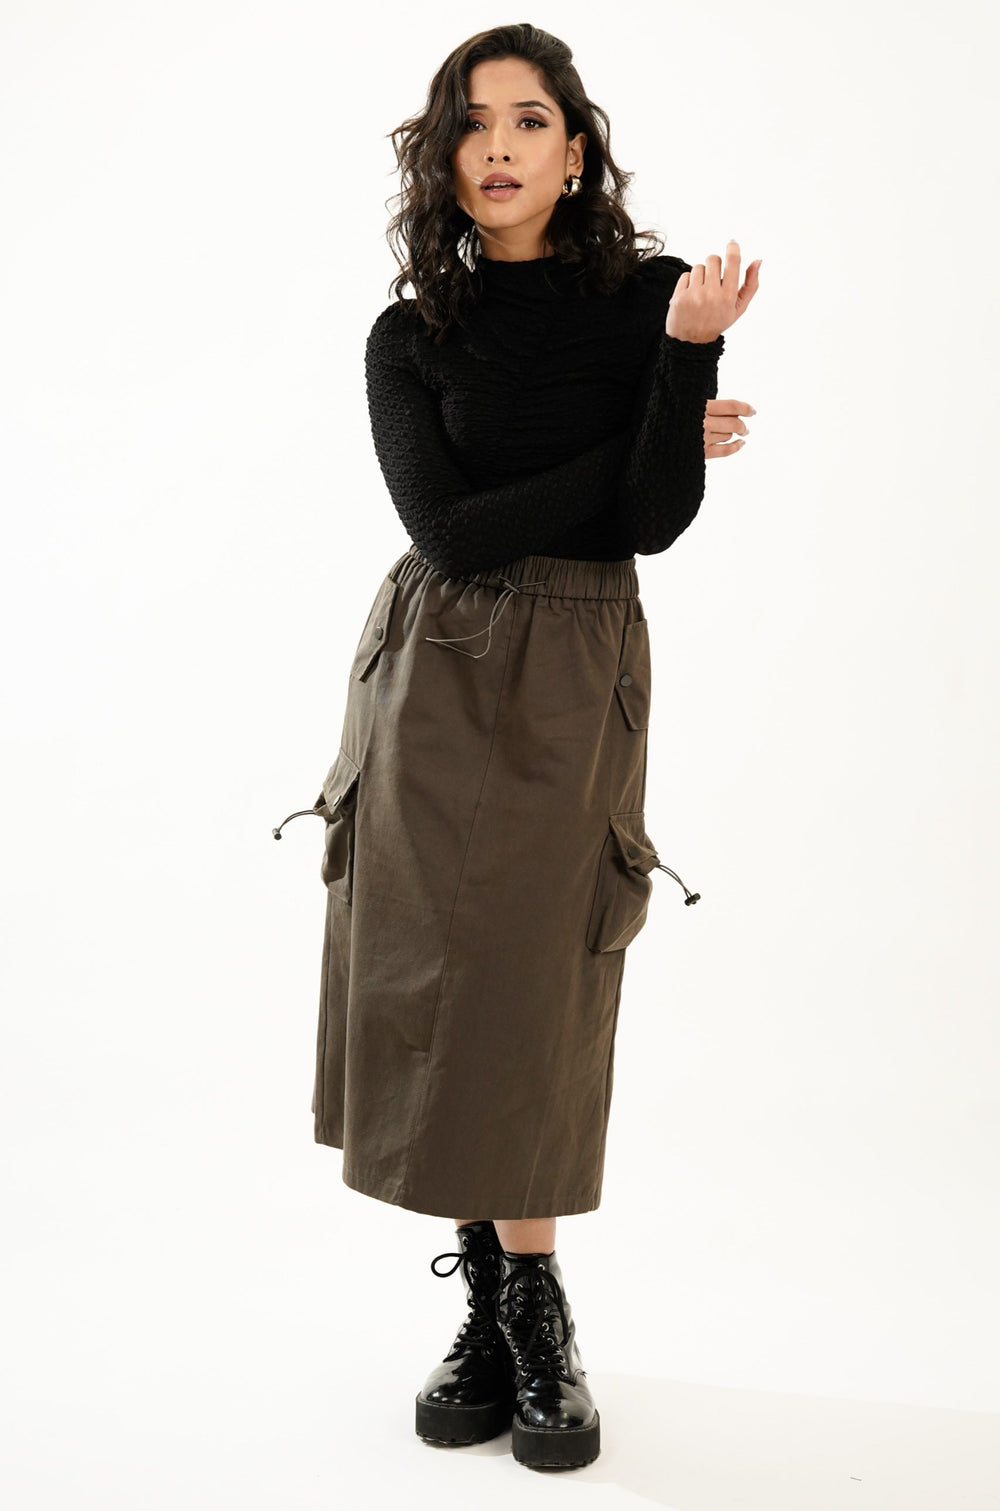 Streetstyle cargo skirt suitable for summer wear